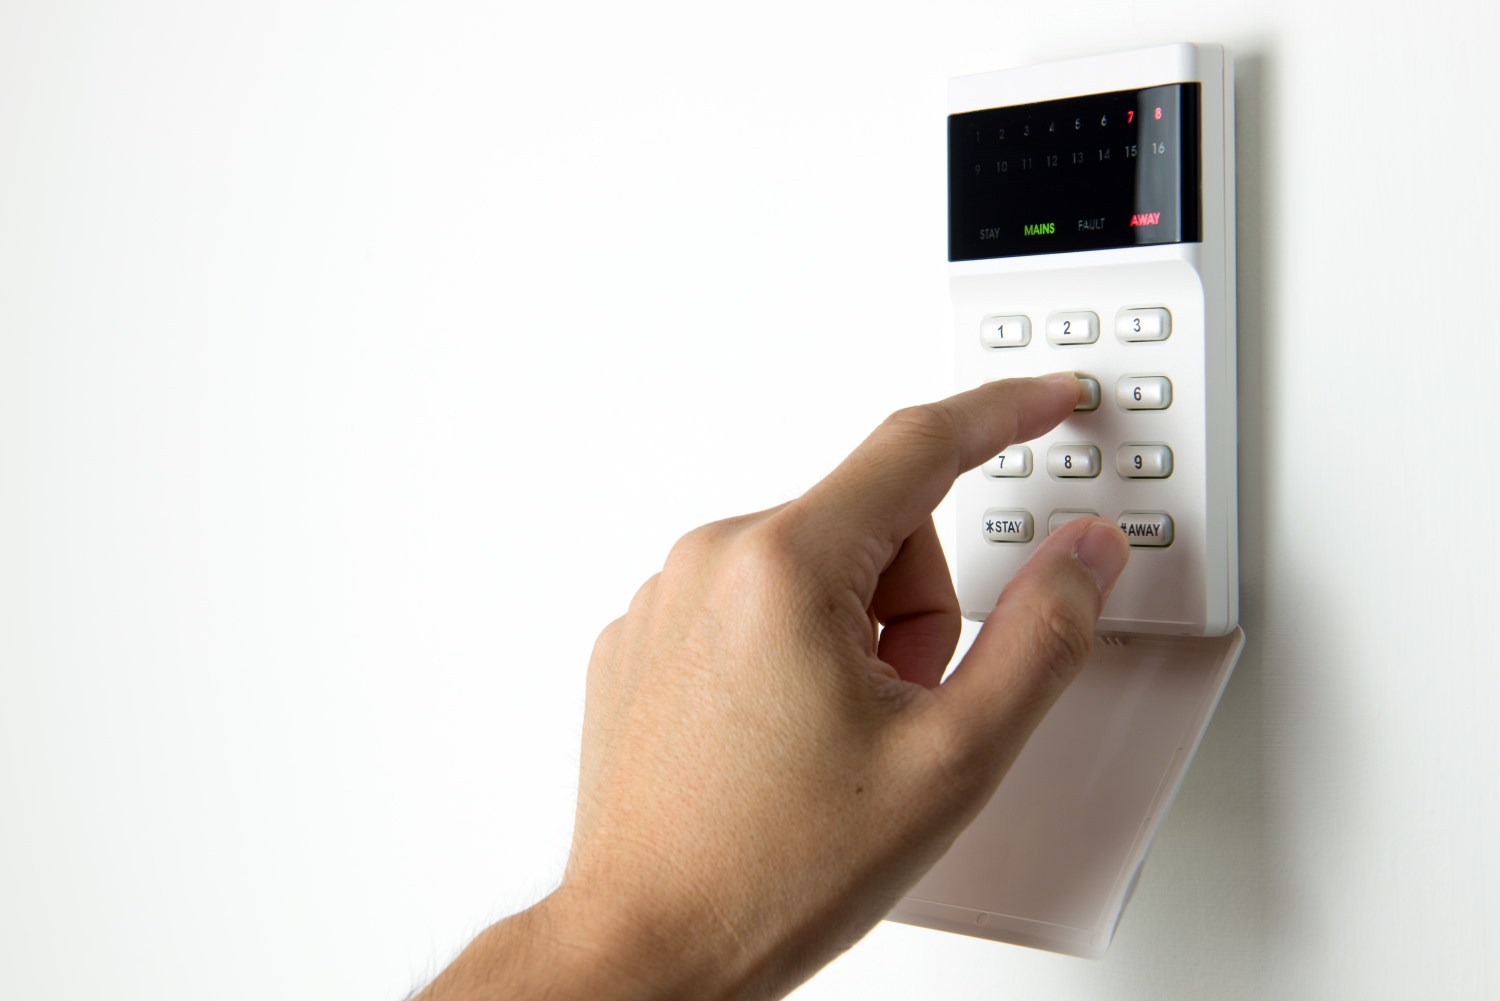 Comprehensive Alarm Systems for Home & Business in Ireland